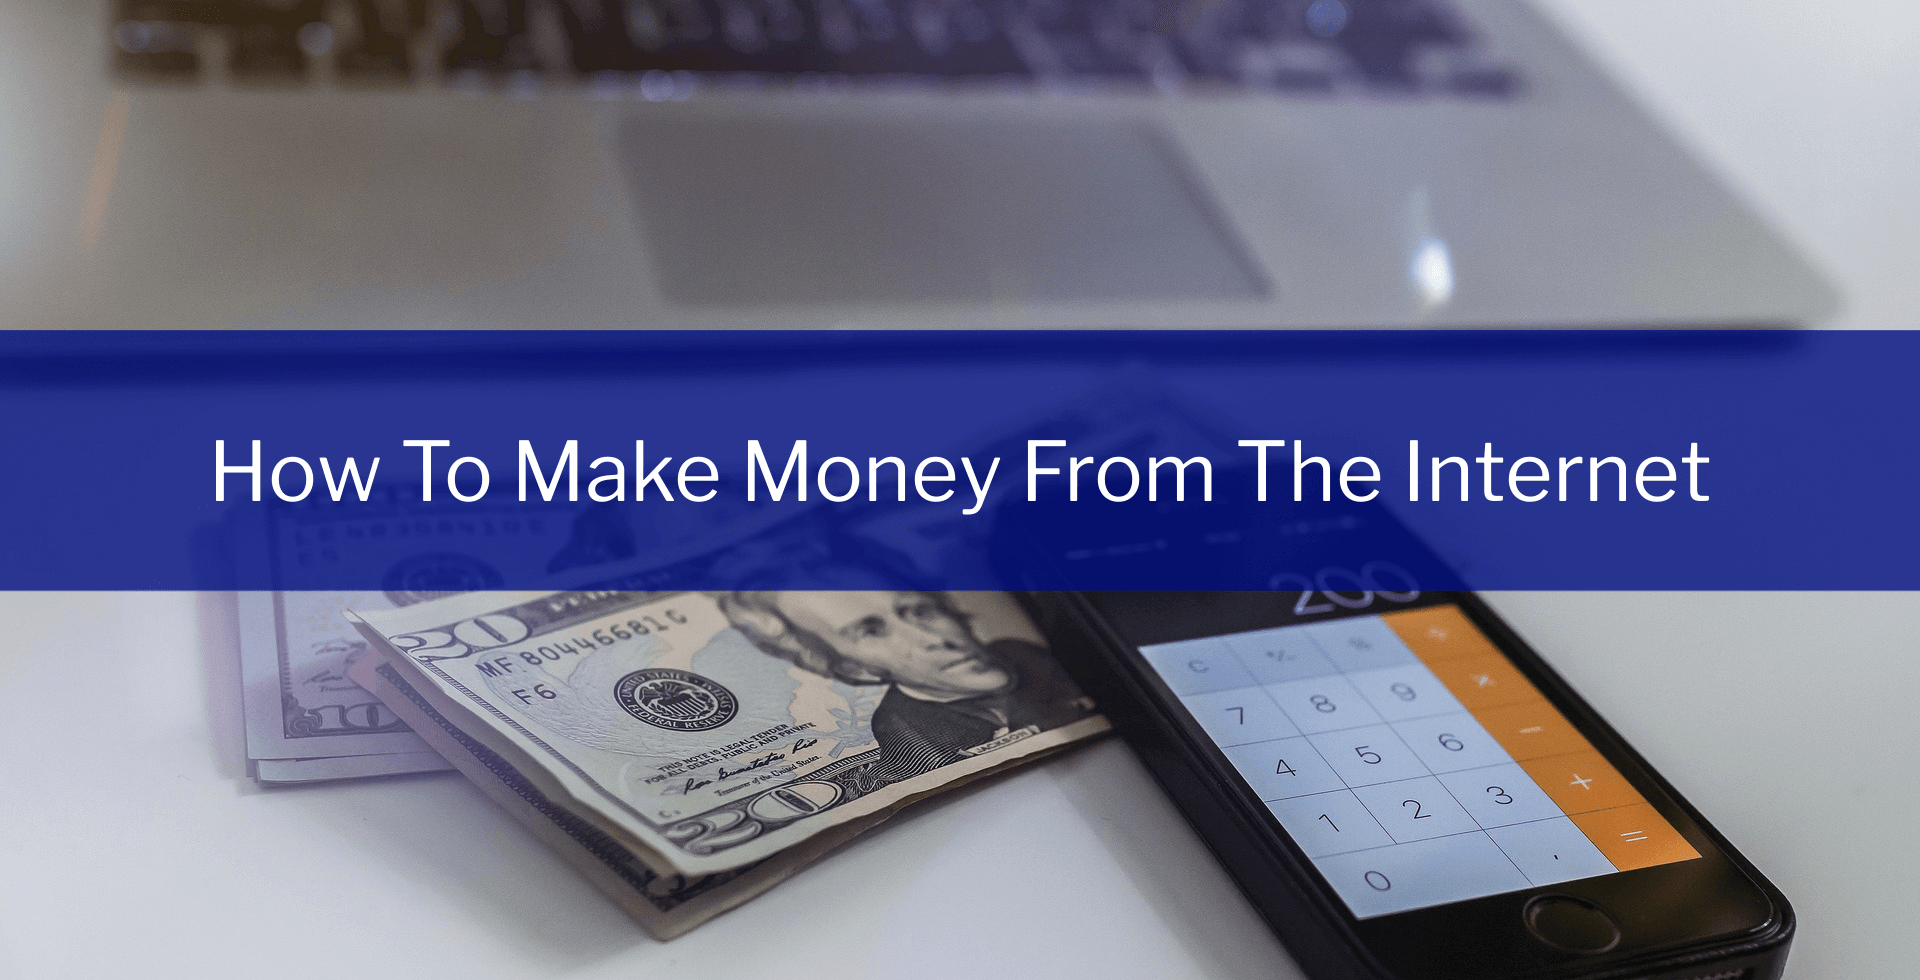 How To Make Money From The Internet